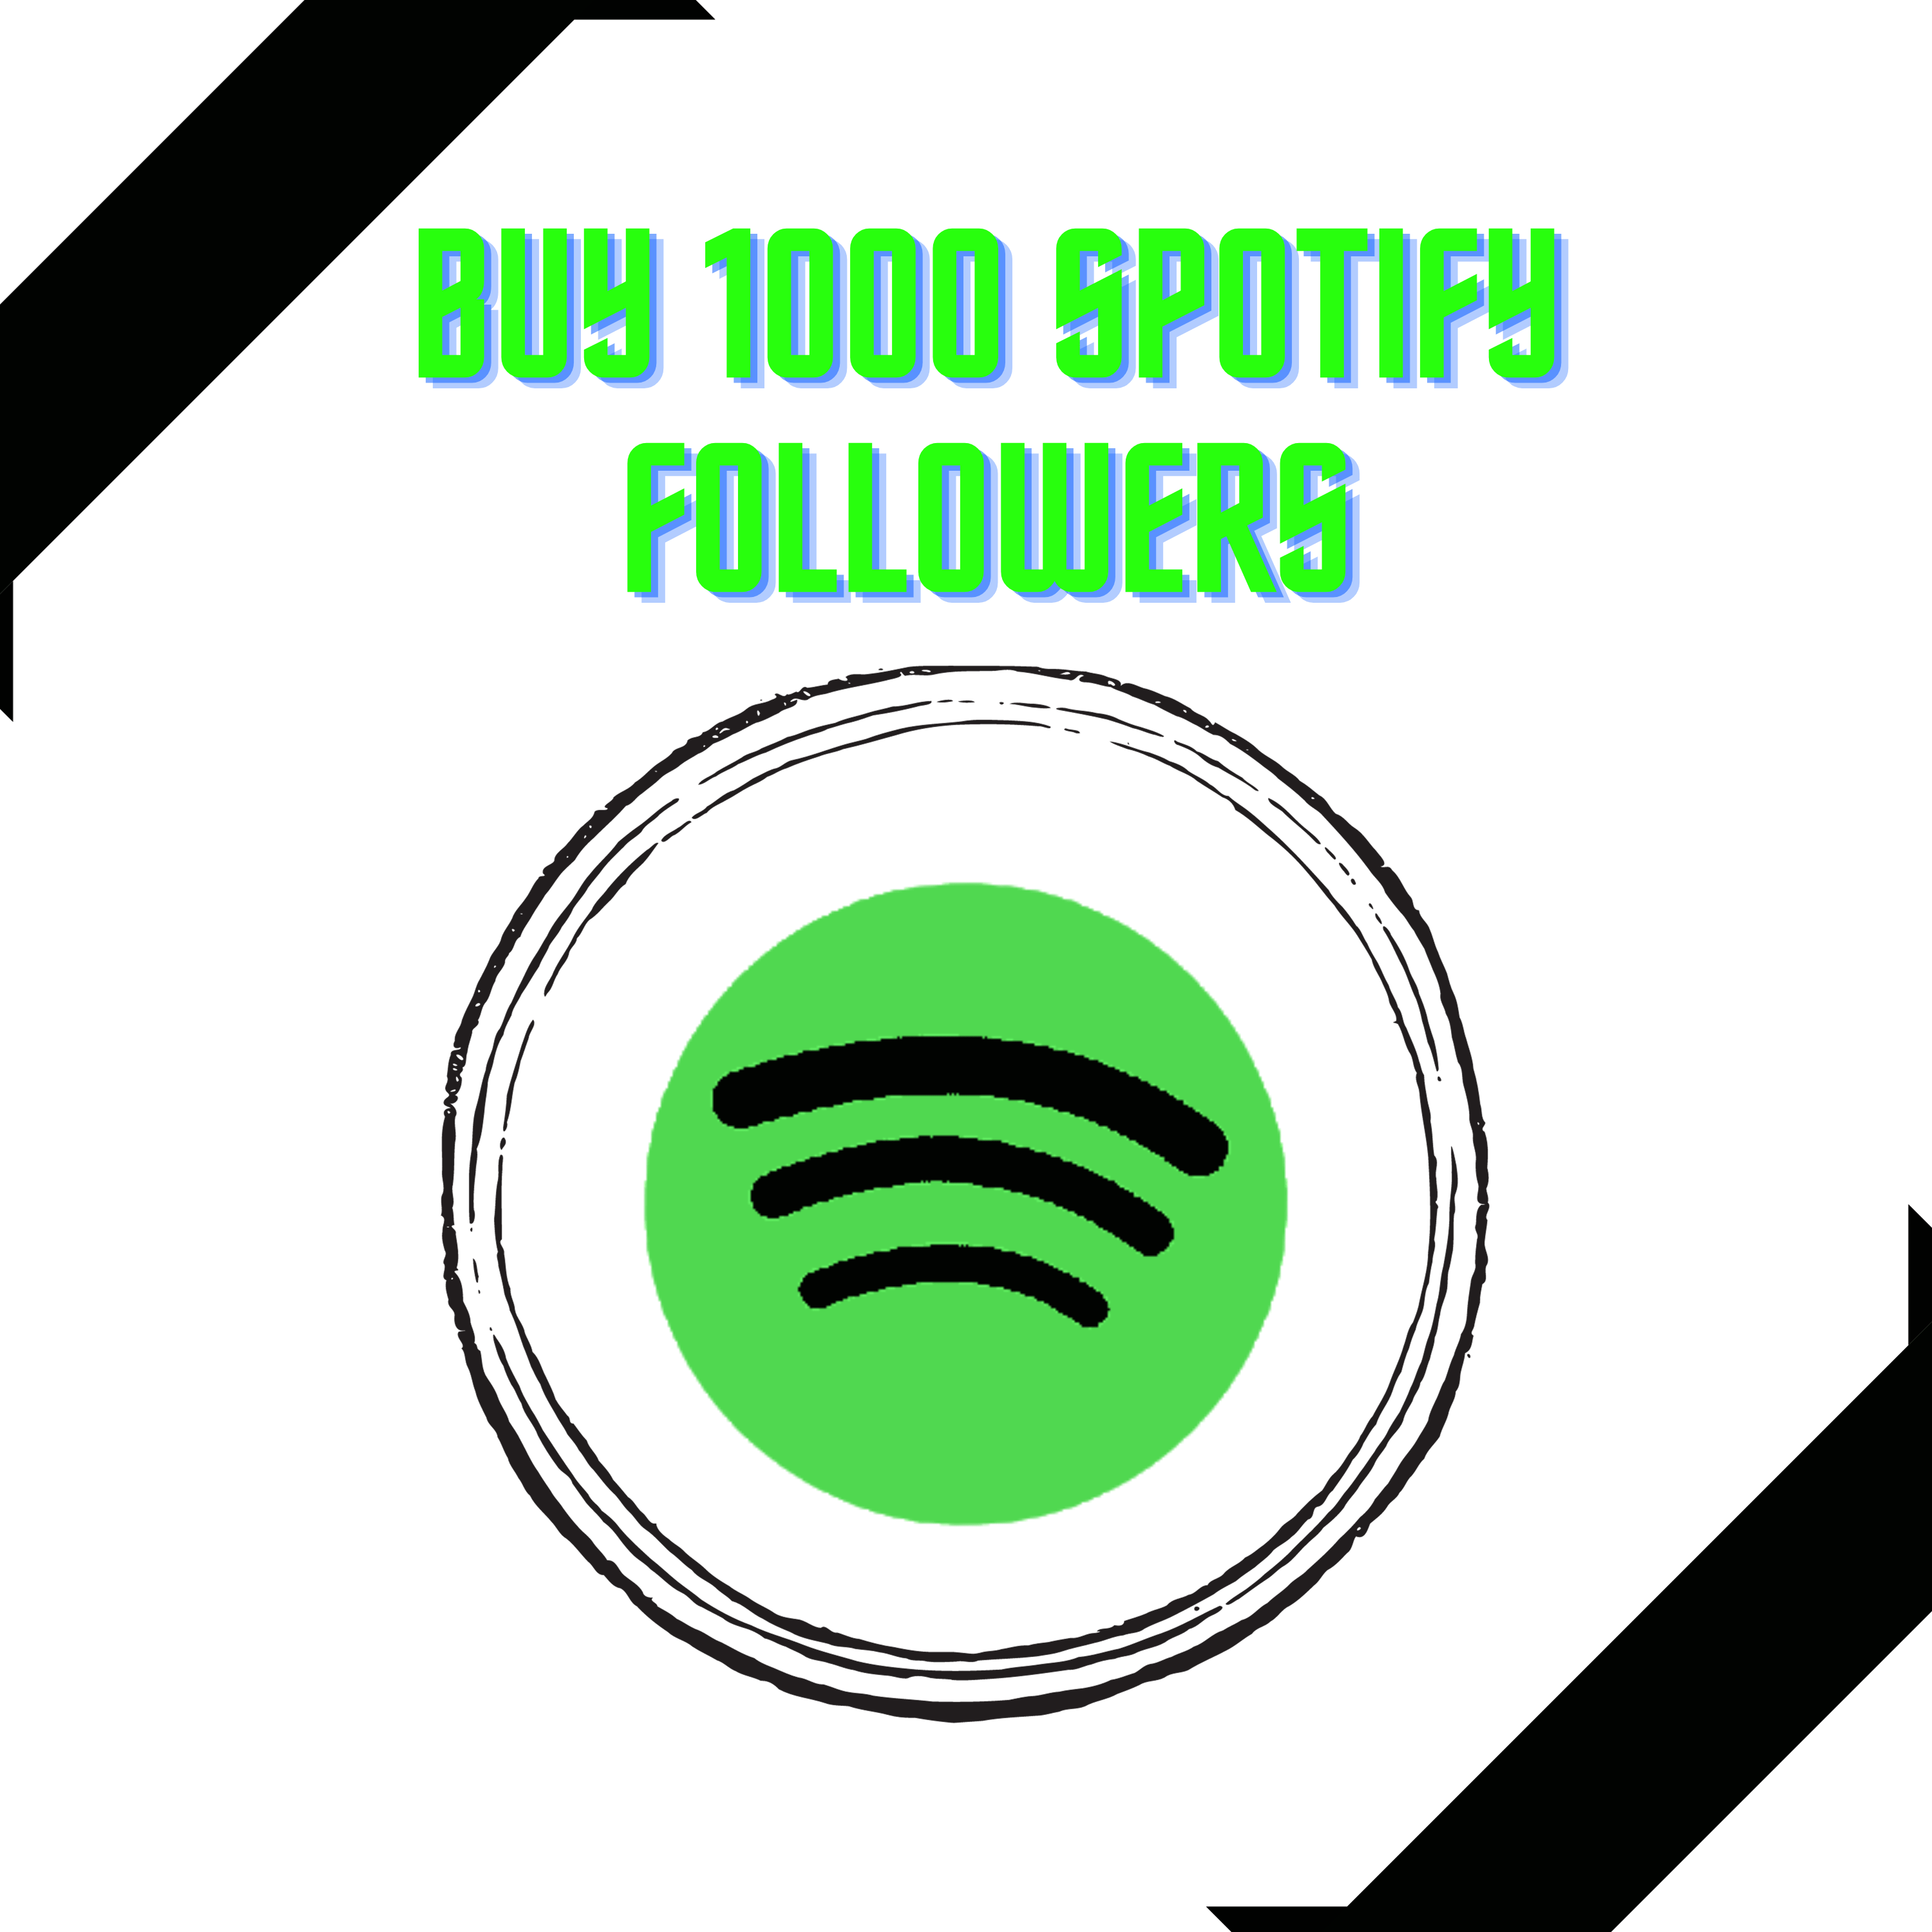 Buy 1000 Spotify followers- Reliable - San Francisco Other